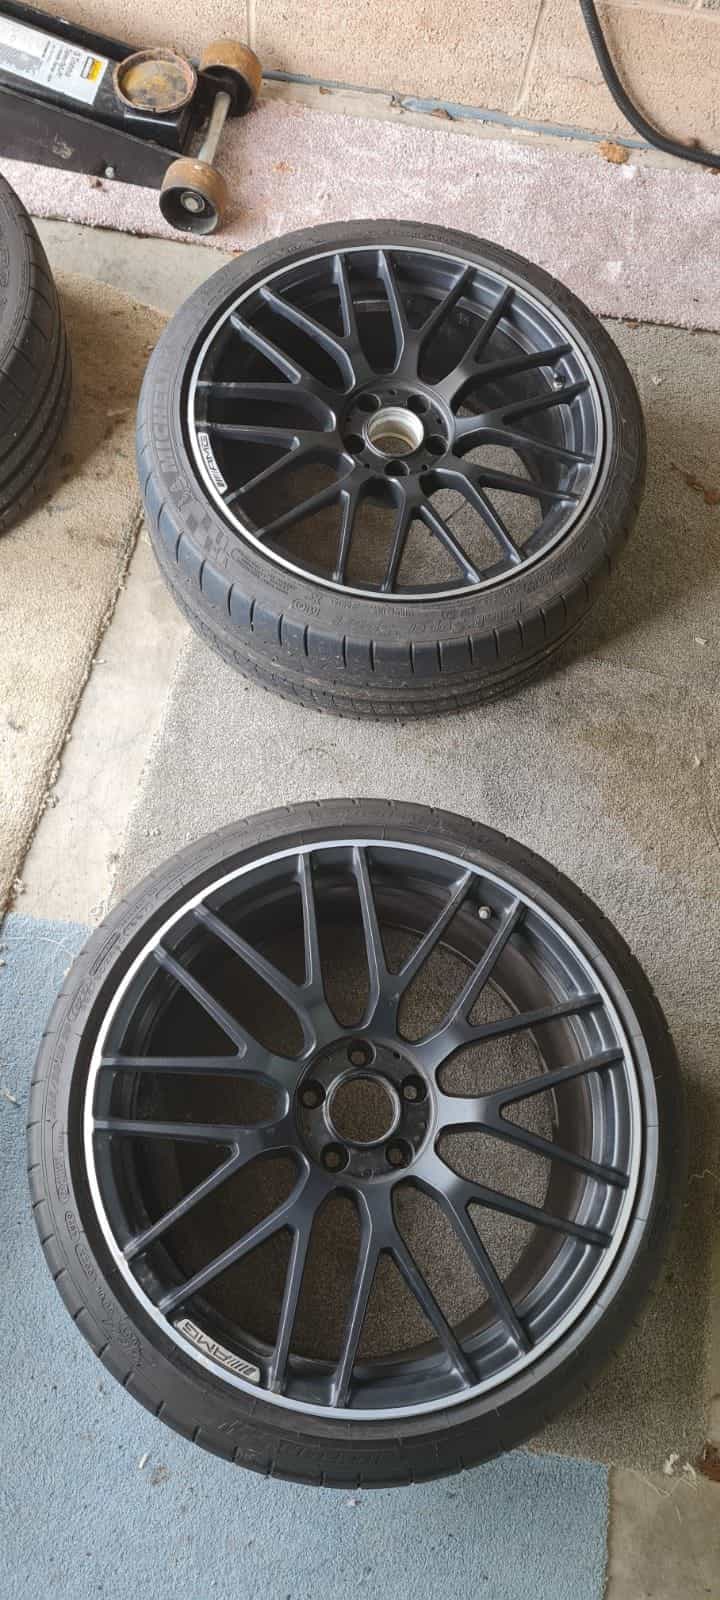 Wheels and Tires/Axles - Genuine 19/20 Forged Cross Spokes for Saloon/Estate - Used - 2015 to 2021 Mercedes-Benz C63 AMG S - Hinckley LE98GR, United Kingdom